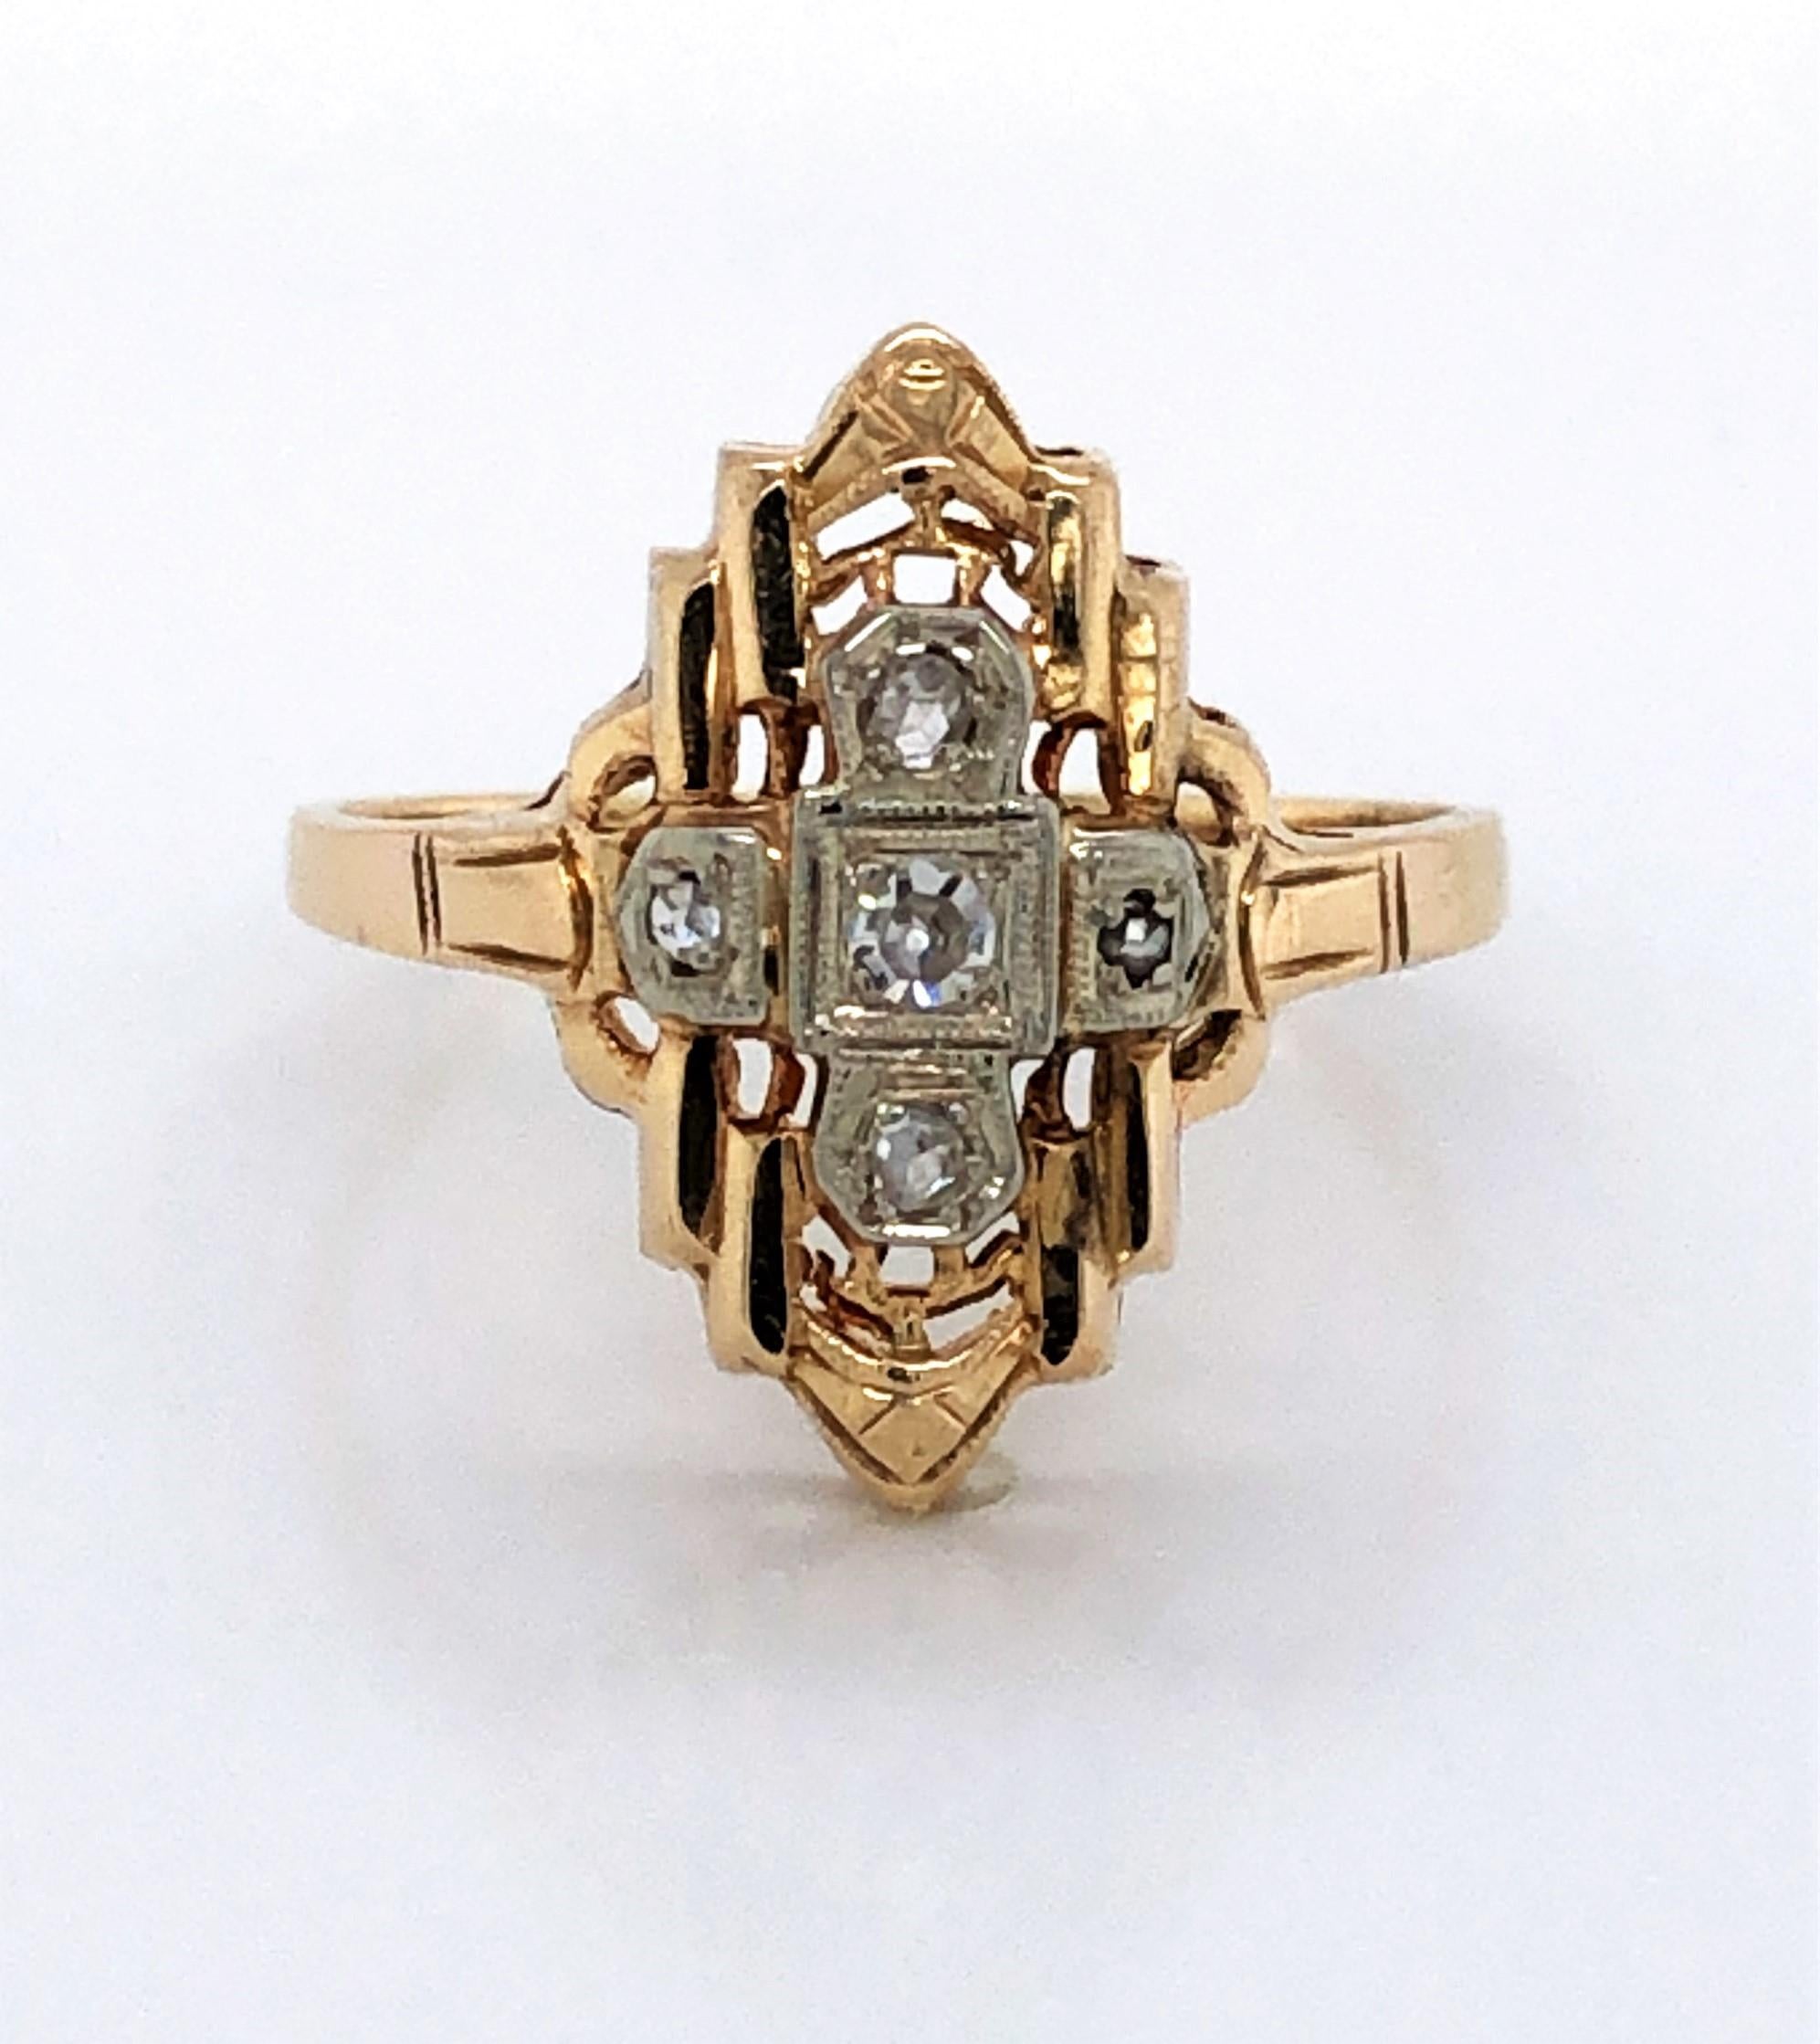 The regal geometric design of this lovely antique ring created in fourteen karat 14k yellow gold depicts the elegance of Art Deco style. Featuring a four-stone center in a cross formation with one .10 carat miner's cut center stone flanked by four